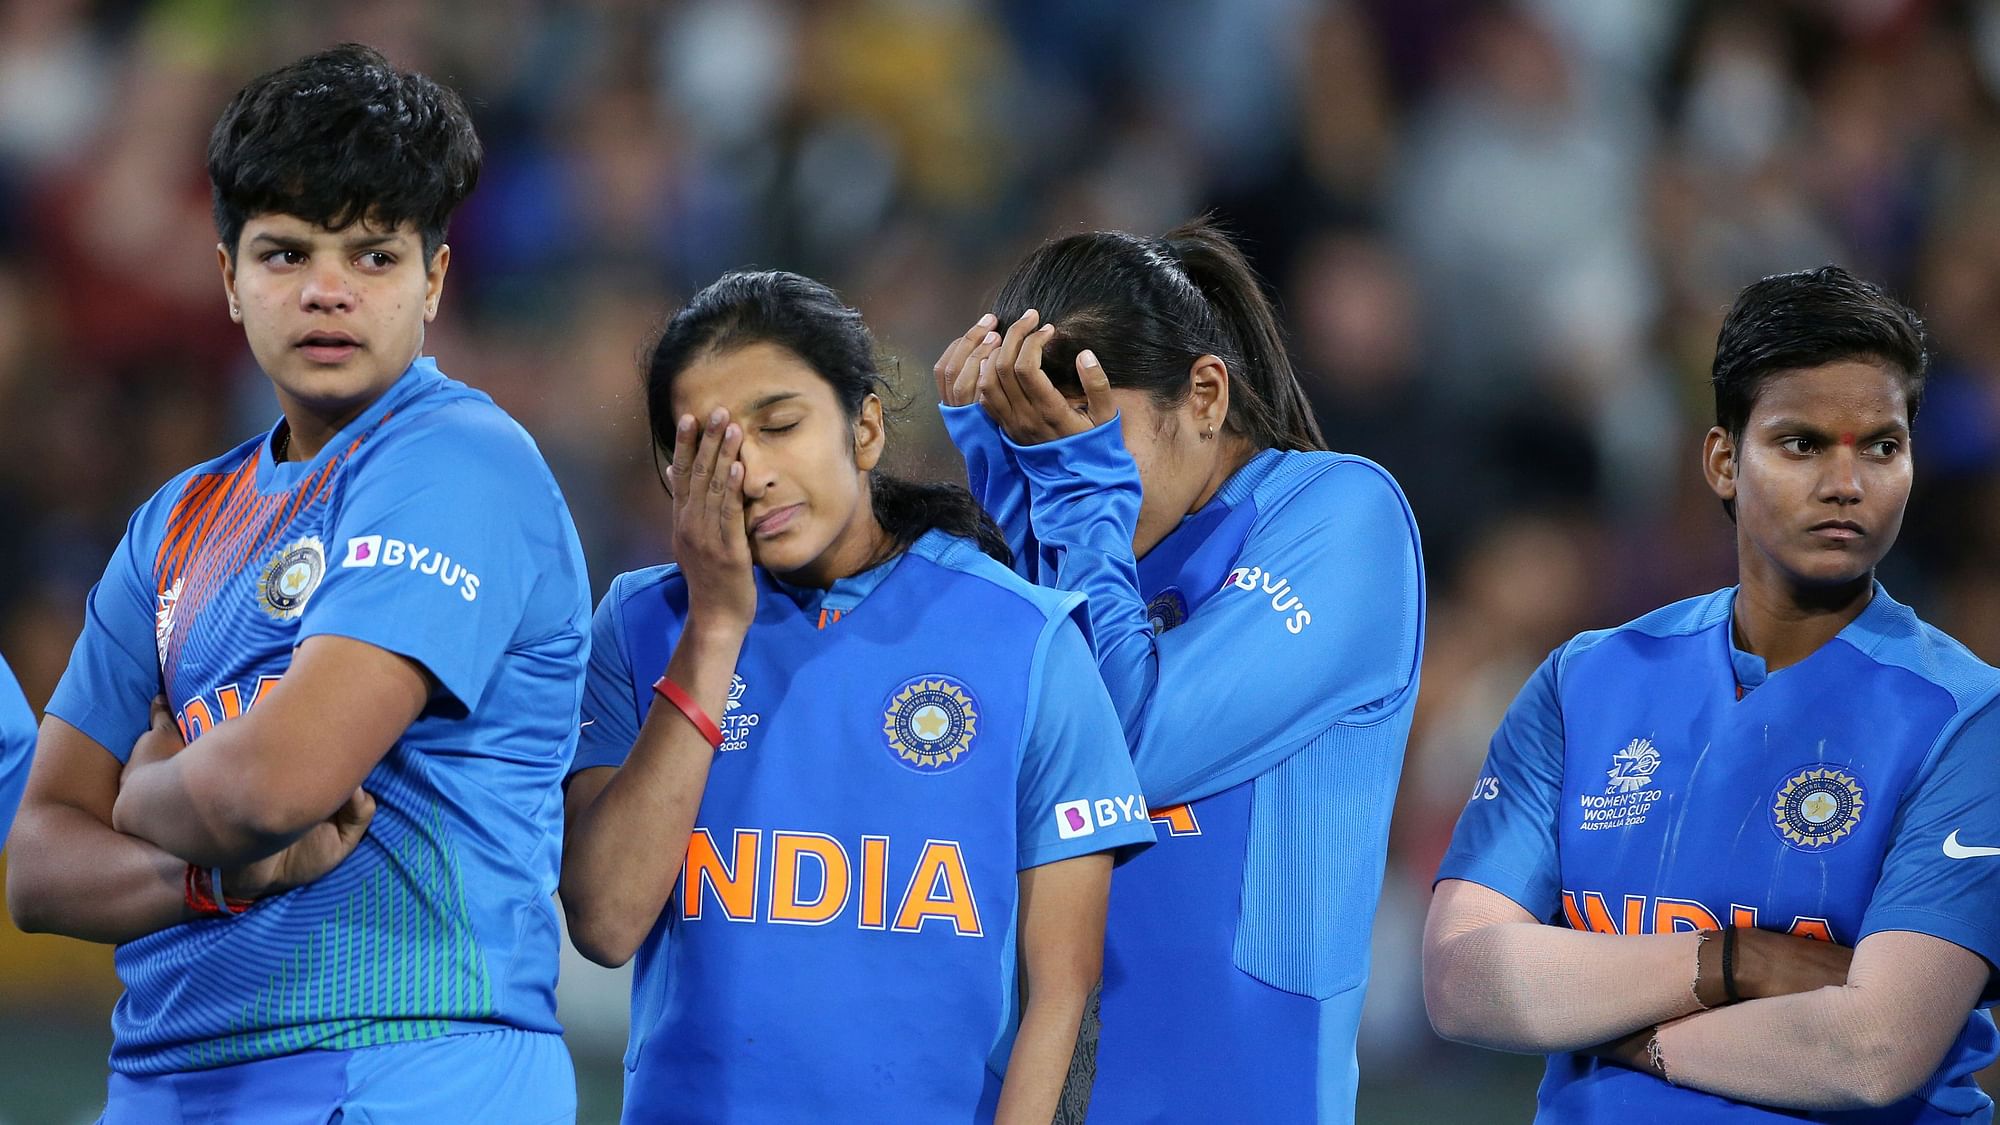 Indian players gather together after their loss to Australia in the Women’s T20 World Cup cricket final match in Melbourne, Sunday.